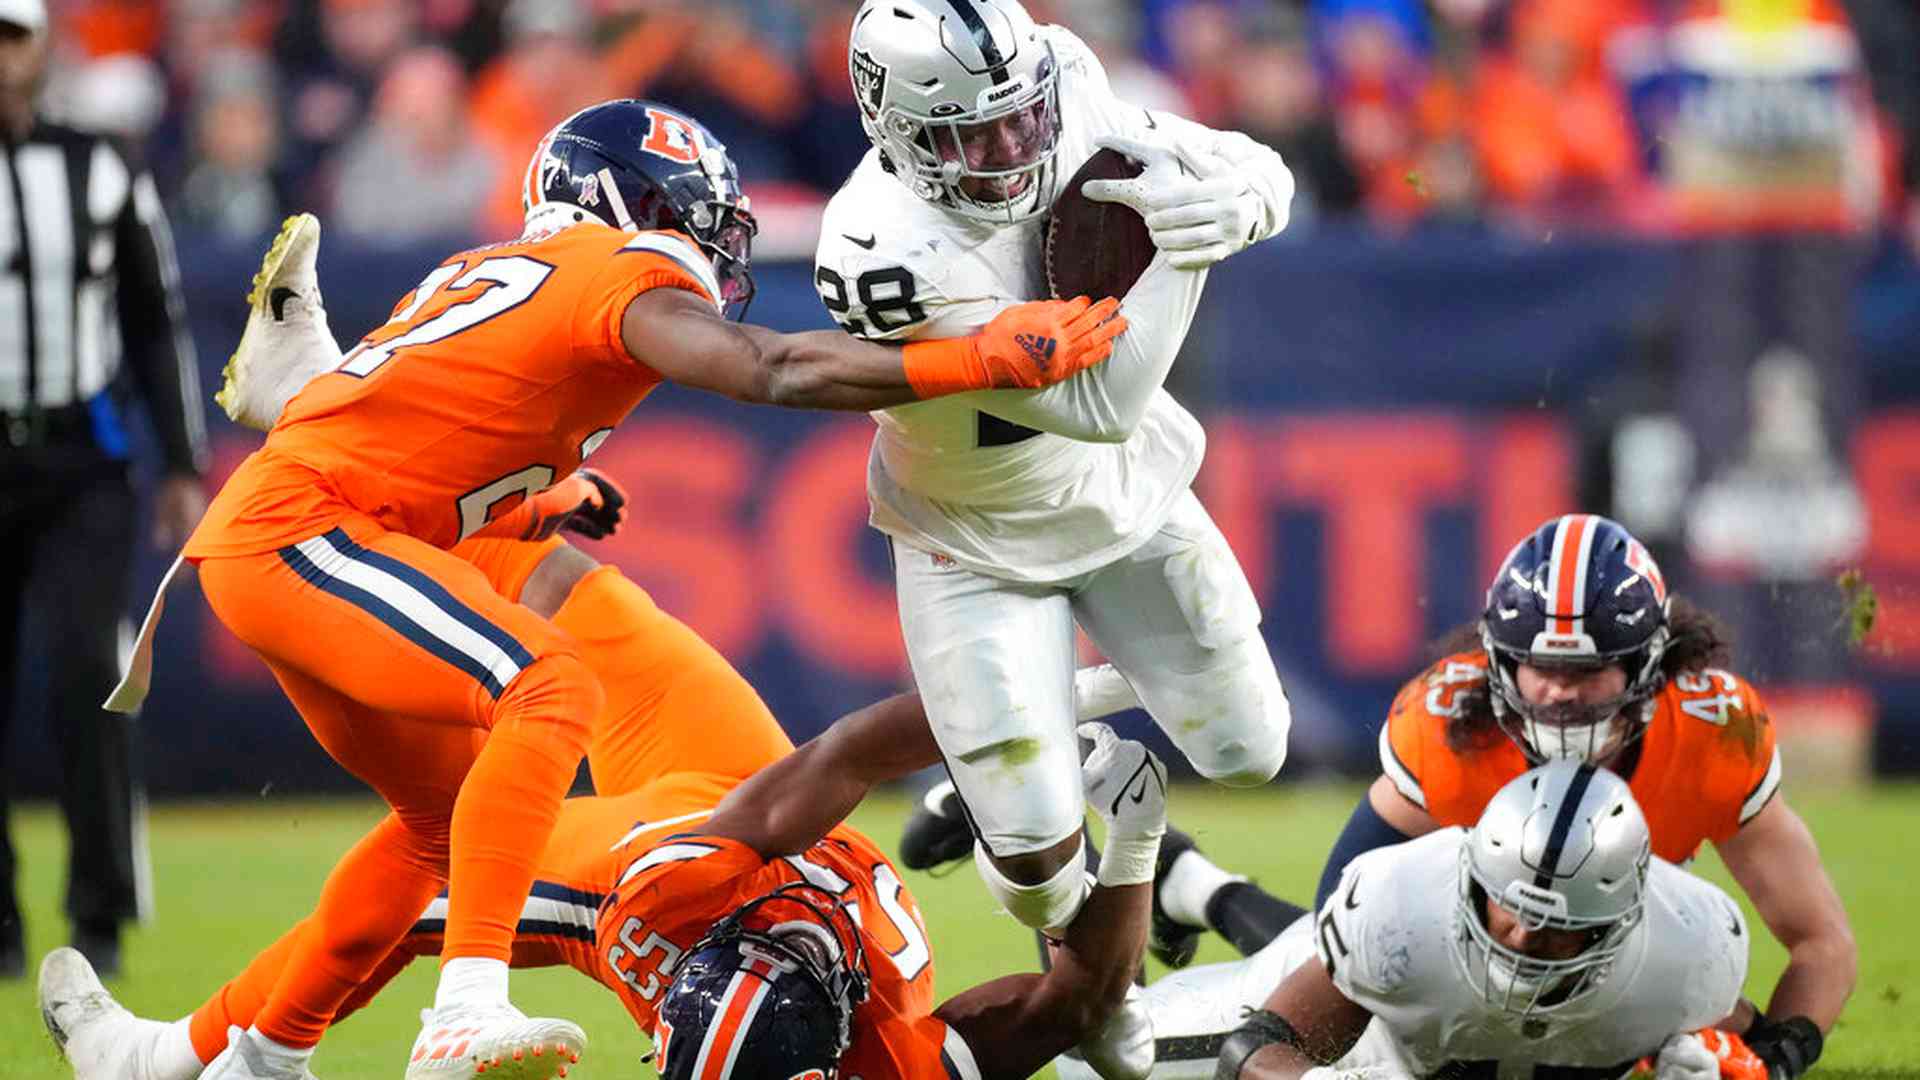 Team Raiders Win Against Their Opponent – The Broncos